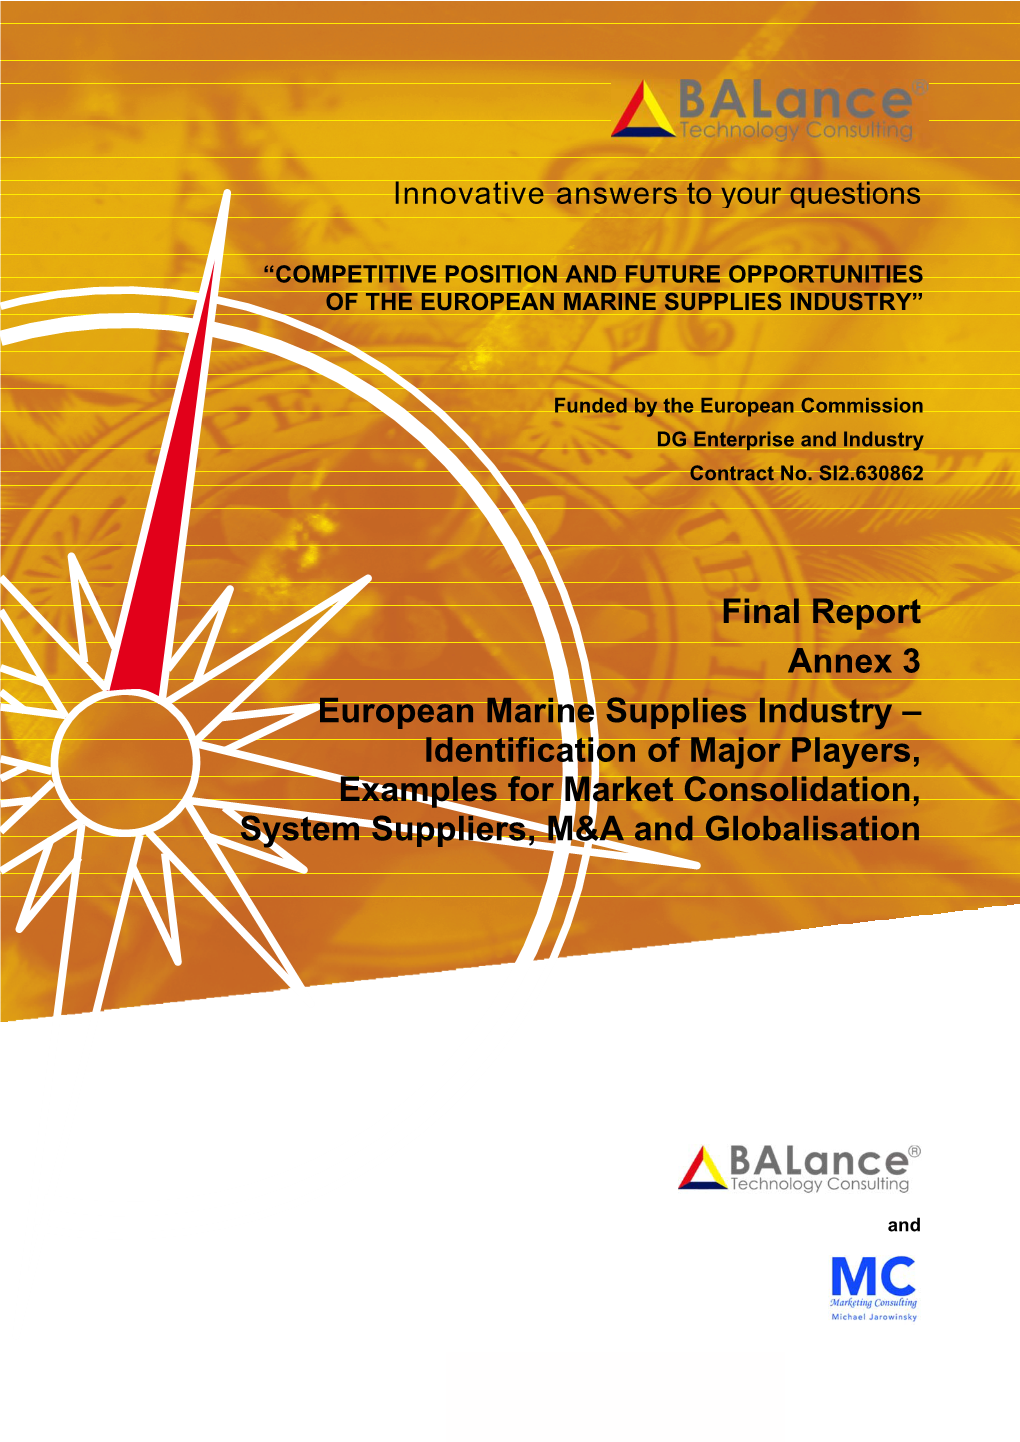 Final Report Annex 3 European Marine Supplies Industry – Identification of Major Players, Examples for Market Consolidation, System Suppliers, M&A and Globalisation